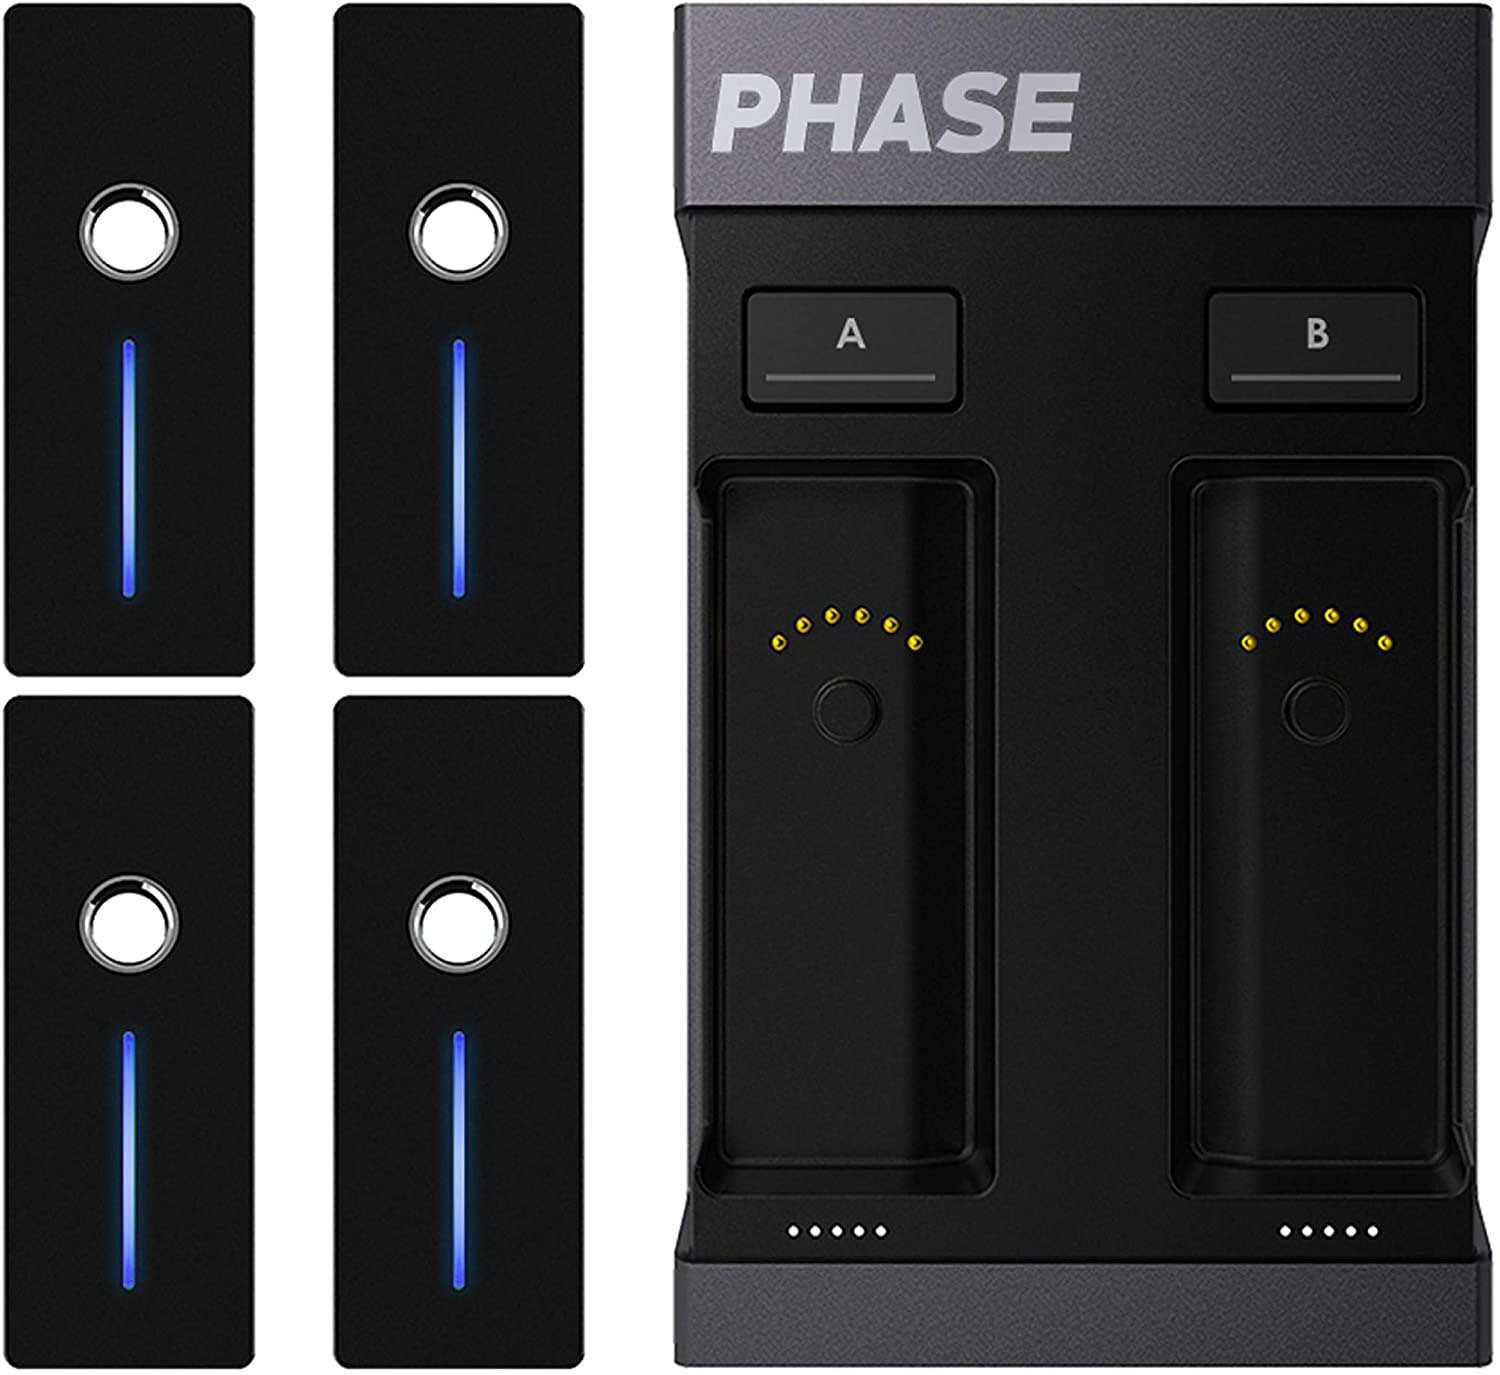 B-Stock: Phase DJ PHASE Ultimate Wireless Timecode Control with 4 Remotes - Hollywood DJ